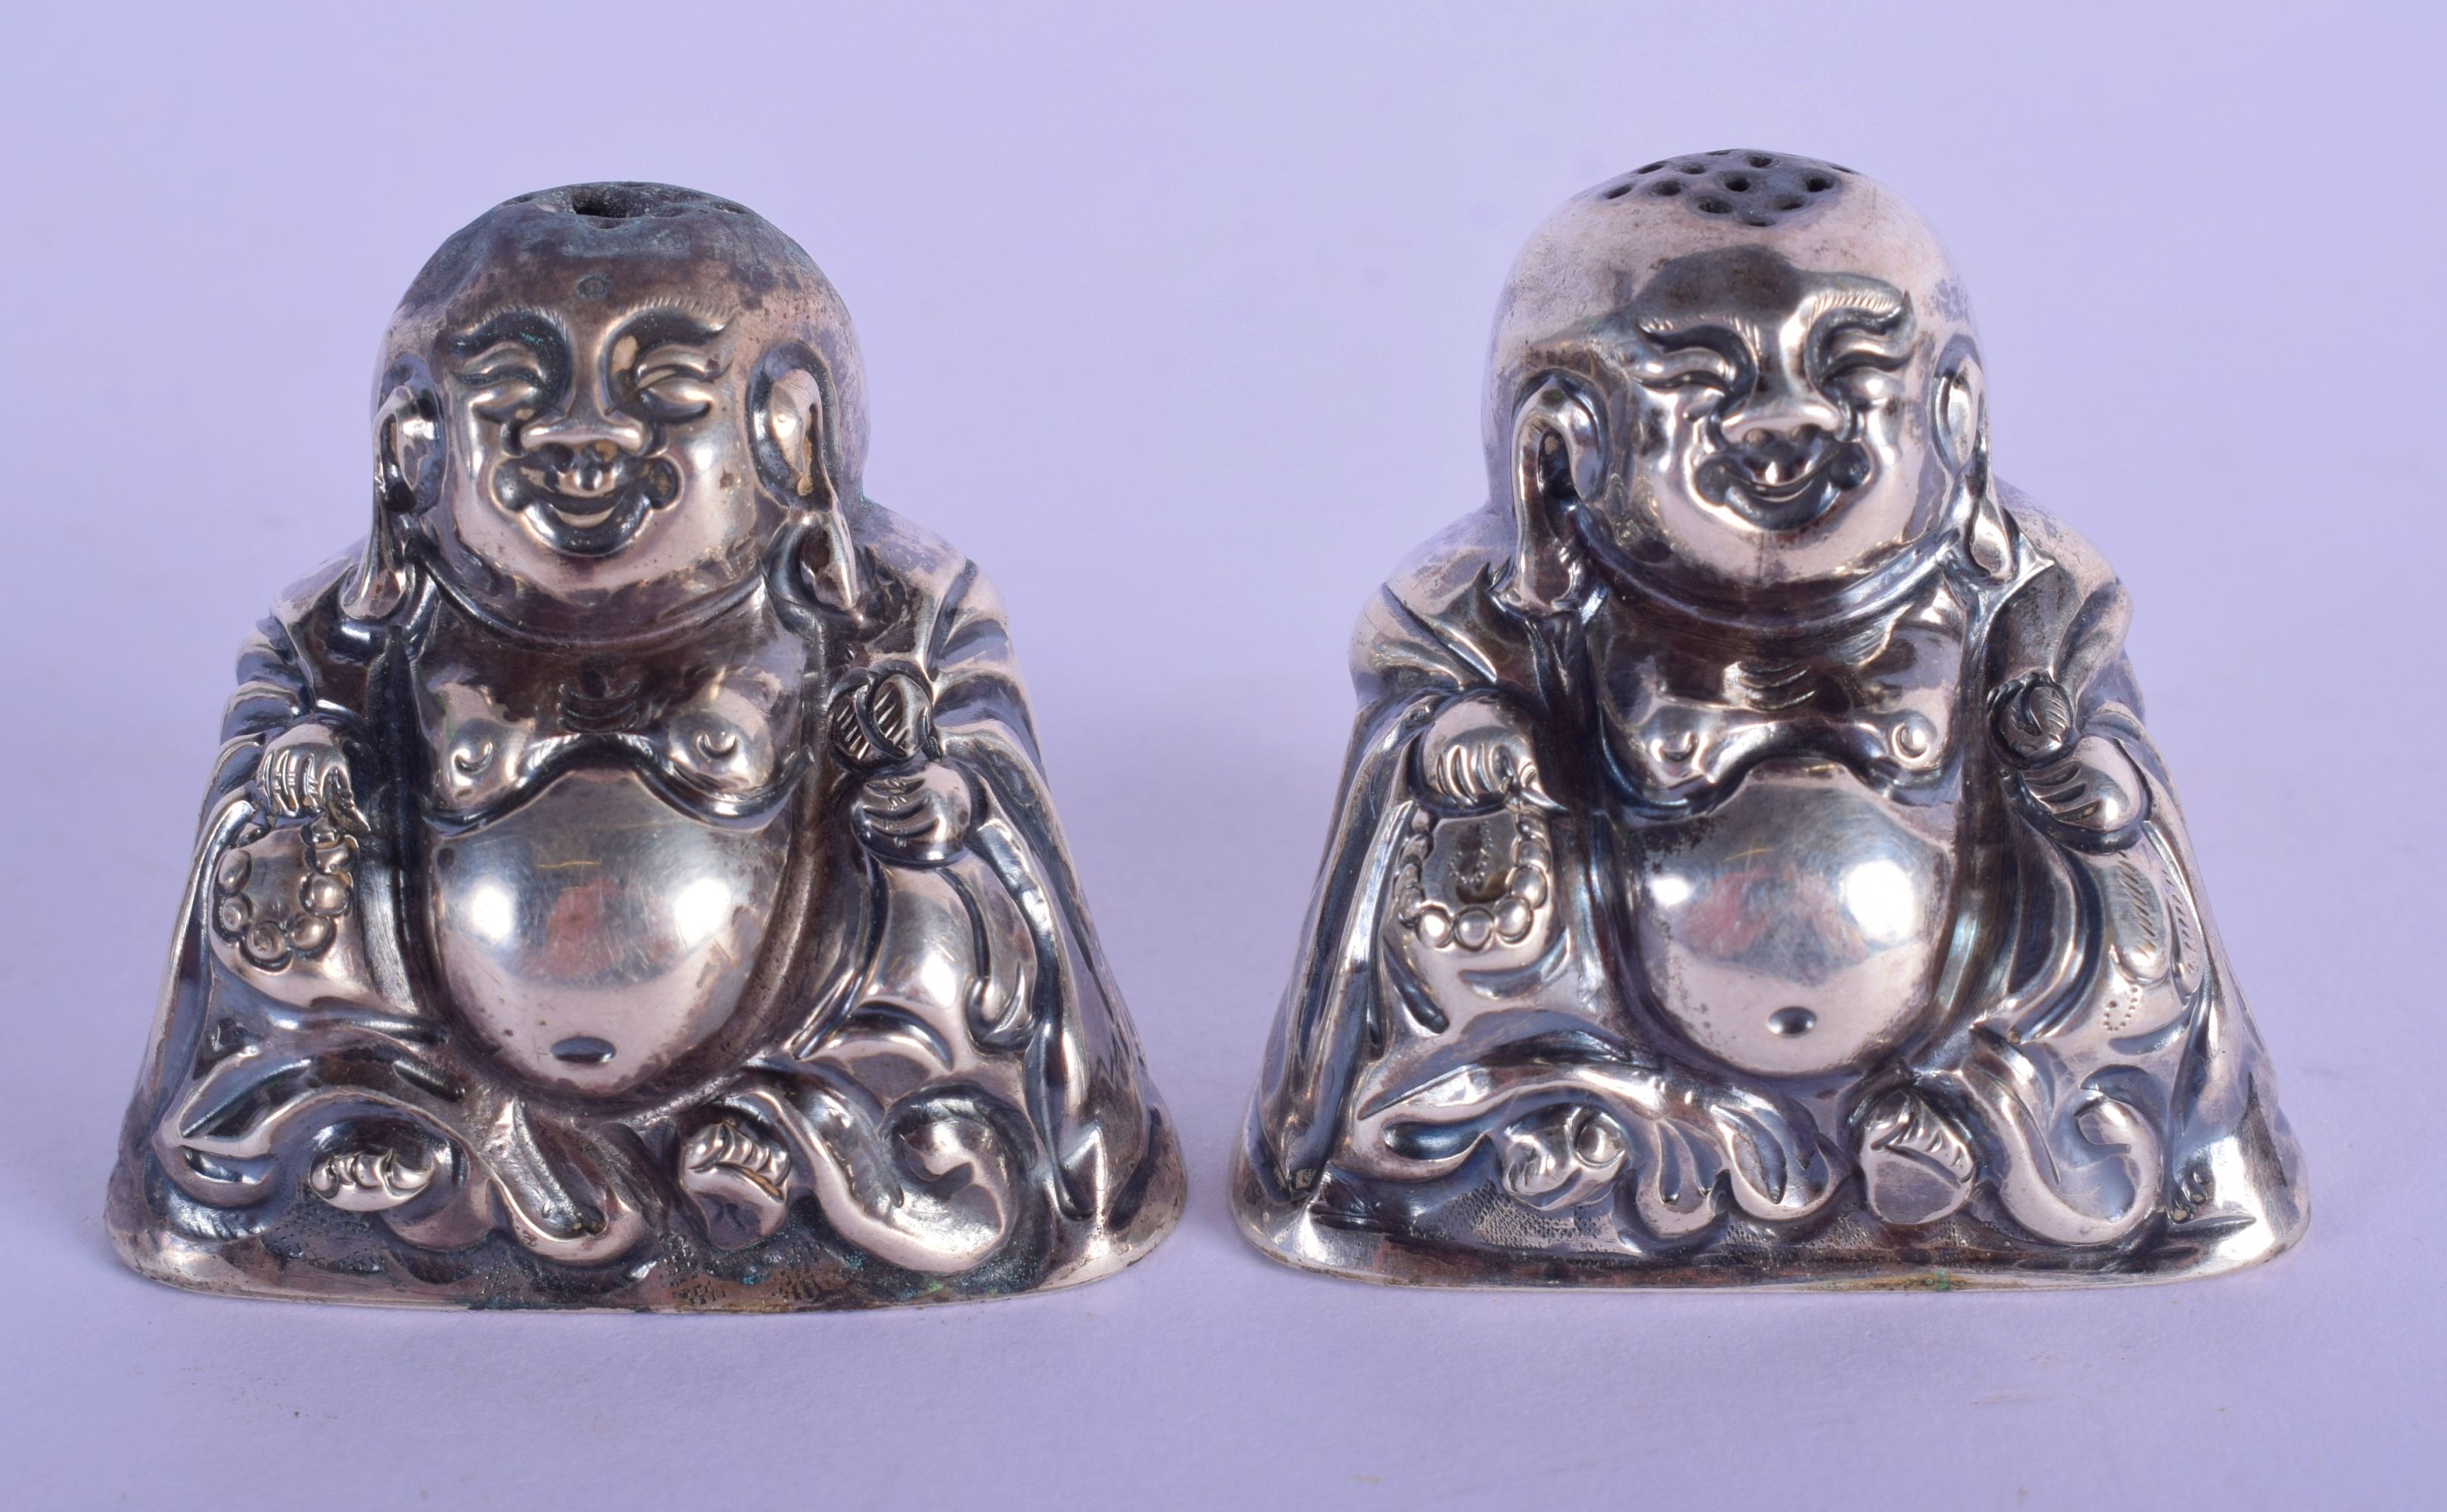 A PAIR OF CHINESE SILVER CONDIMENTS IN THE FORM OF BUDDHA. 4cm x 4.5cm x 2.5cm, weight 43g